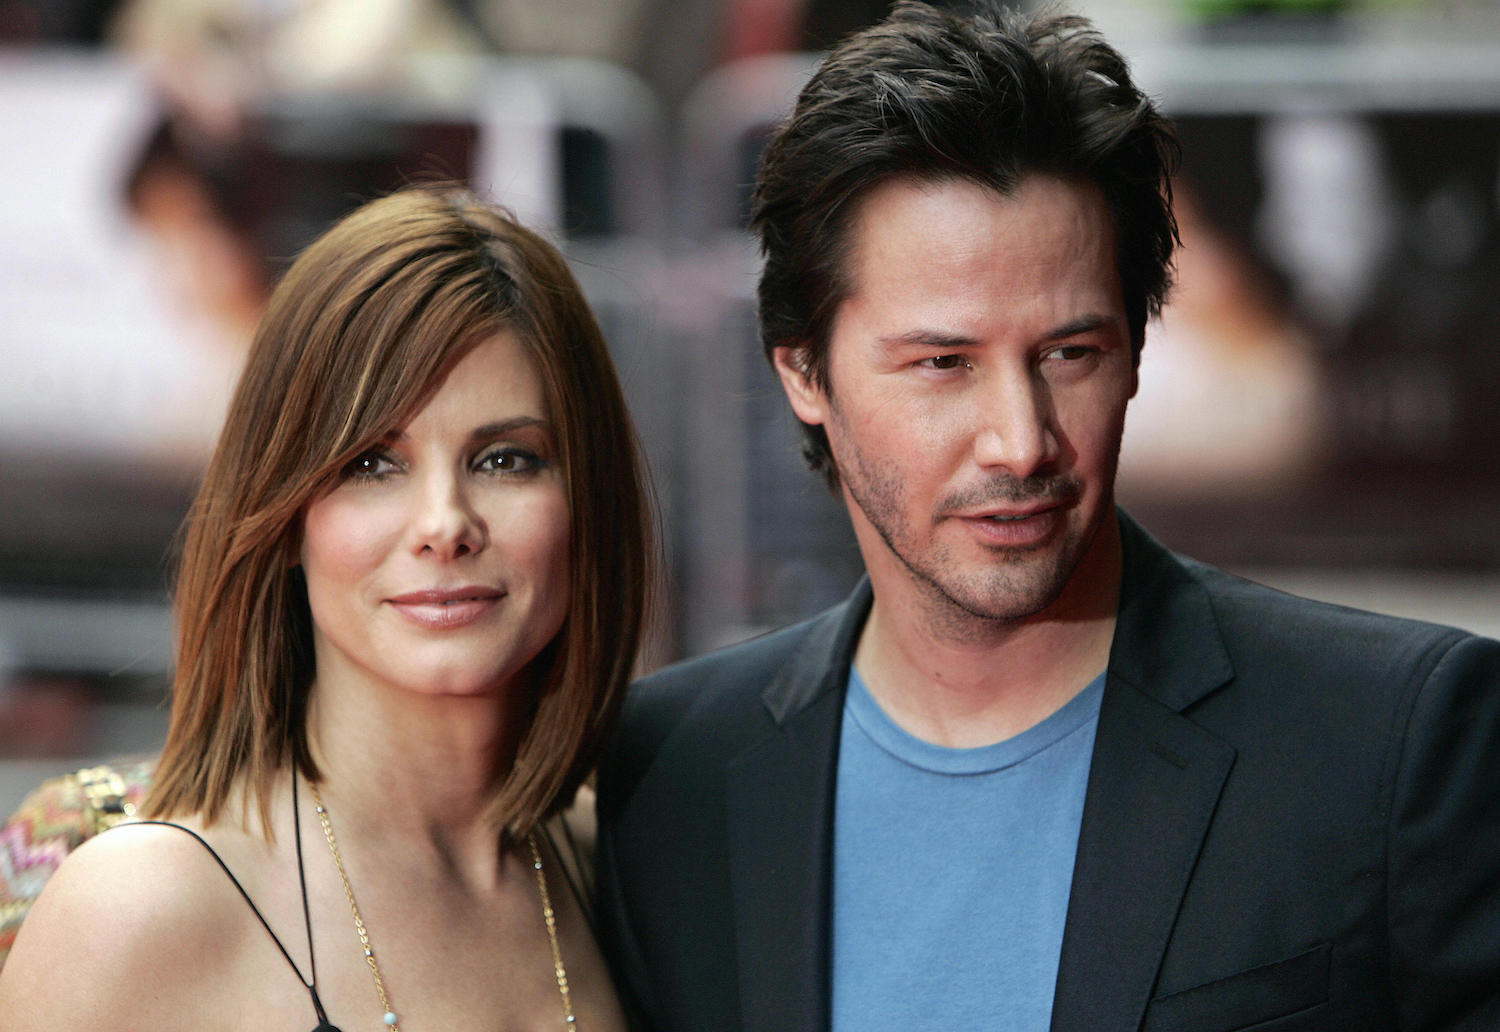 Keanu Reeves and Sandra Bullock arrive for the UK premiere of the film The Lake House